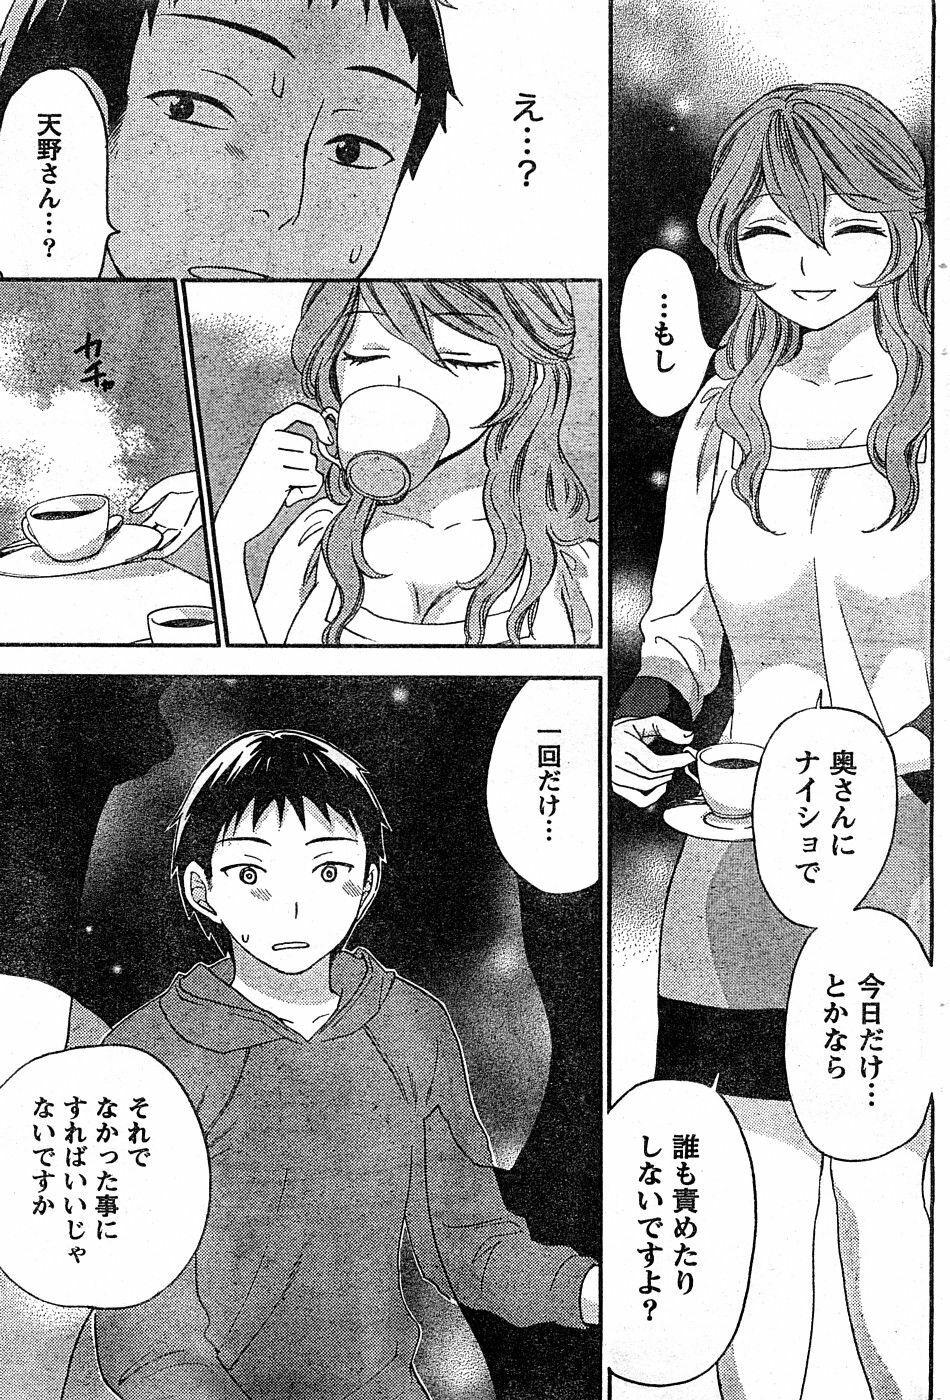 Monthly Vitaman 2009-02 [Incomplete] page 40 full